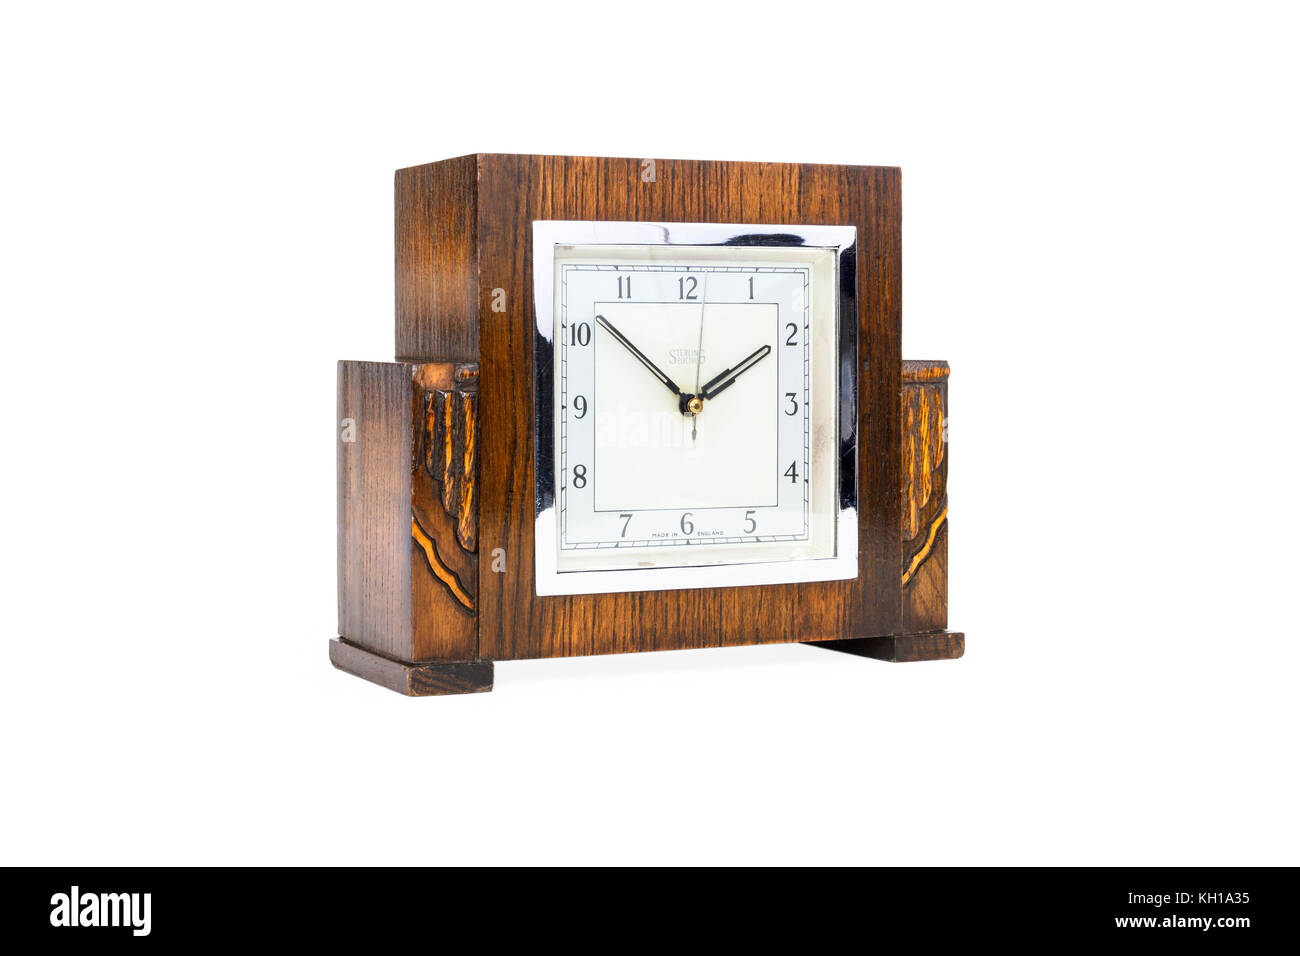 A vintage square-faced Sterling synchronous electric clock in polished wooden case, c1937 Stock Photo